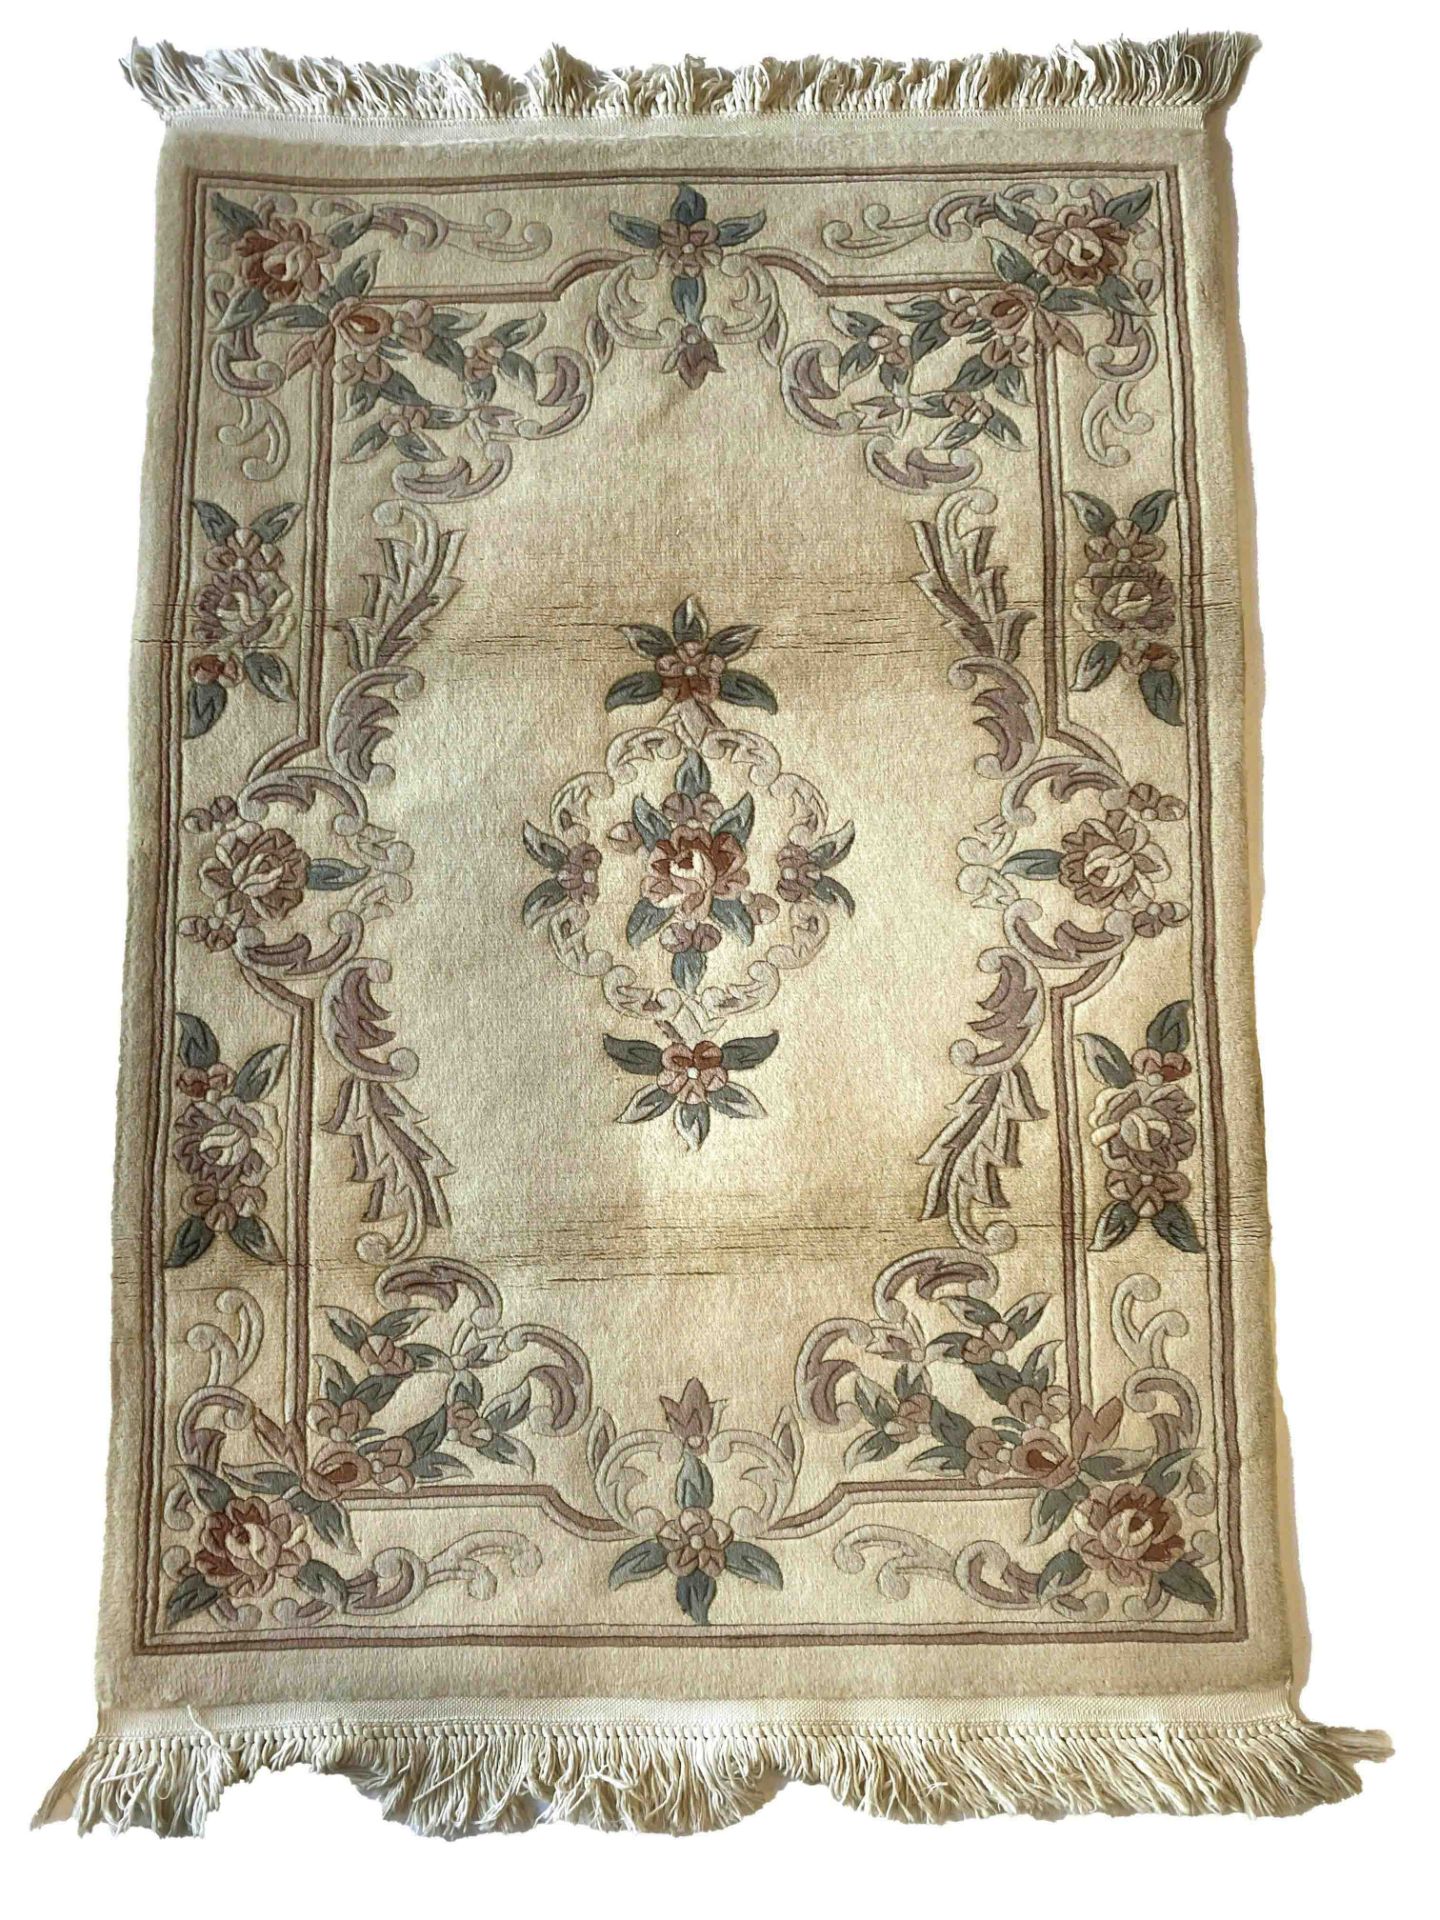 Rug, China, good condition, 180 x 105 cm - The rug can only be viewed and collected at another